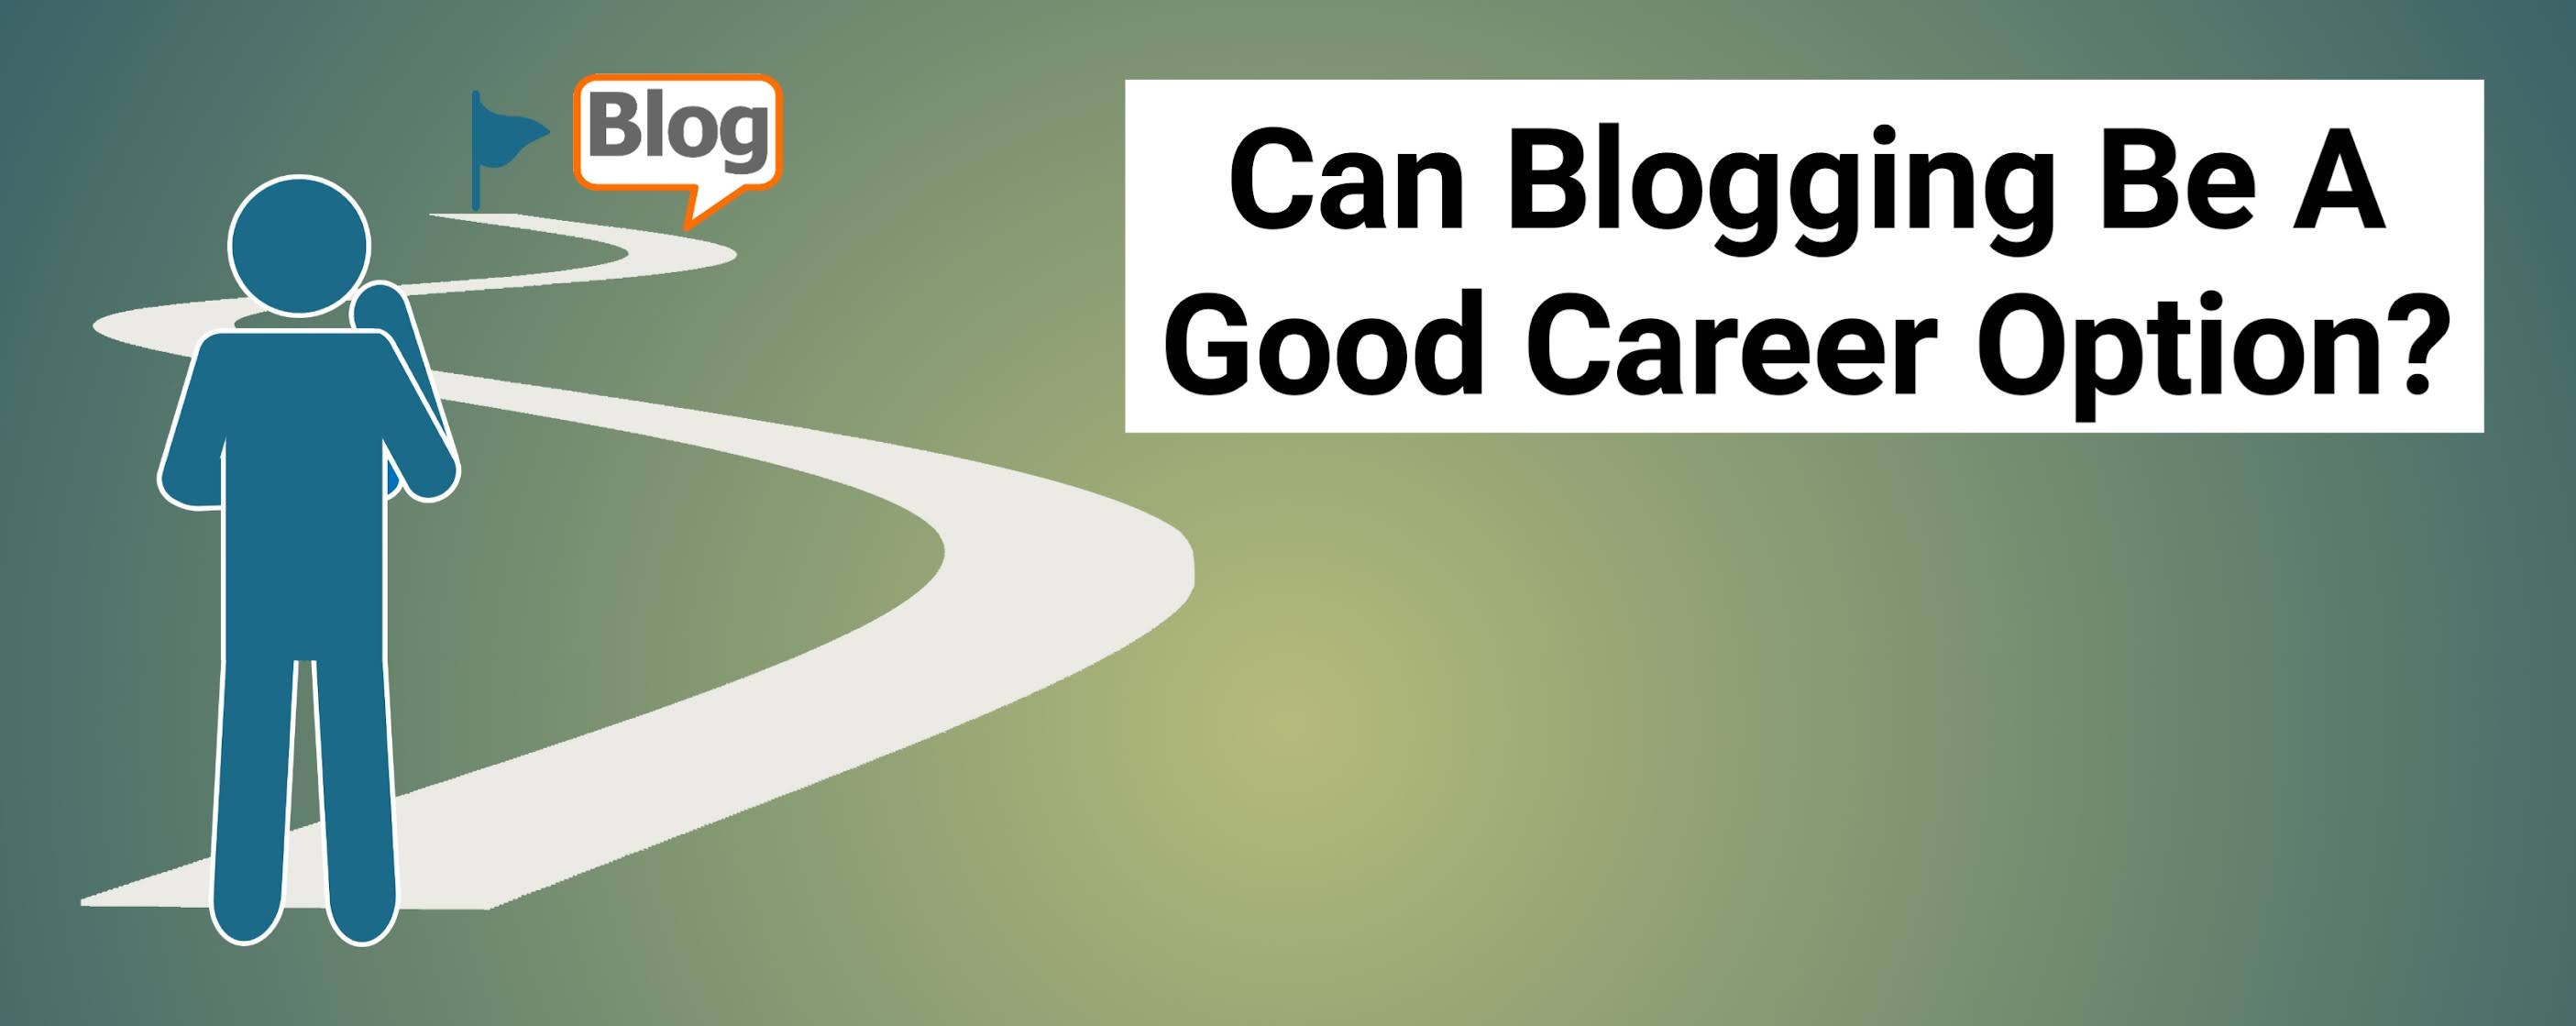 Can Blogging Be A Good Career Option?